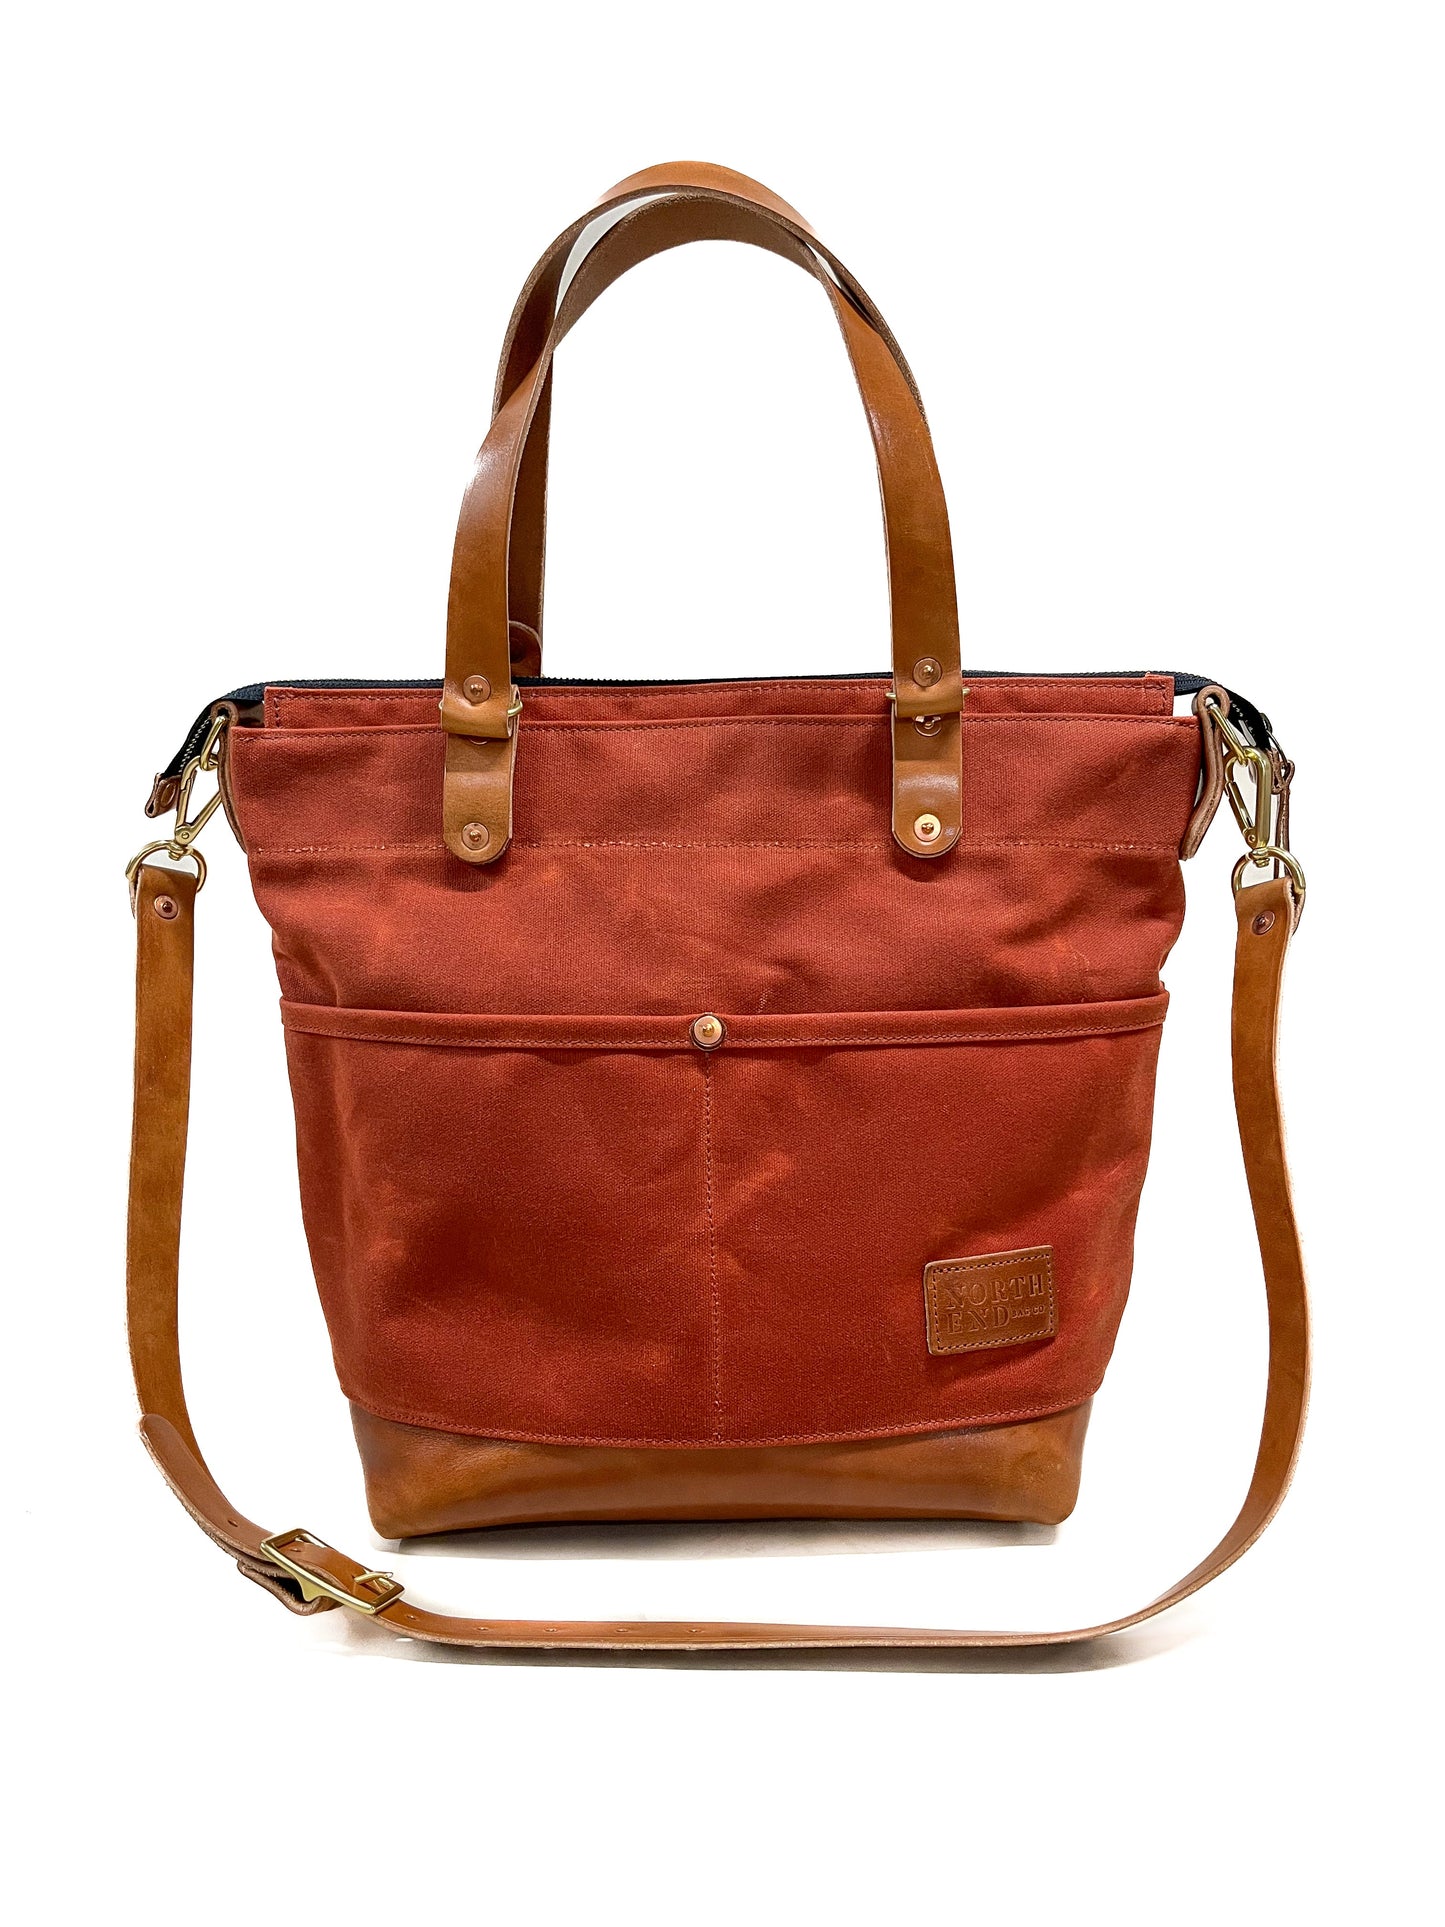 #9 - The 76th St Tote